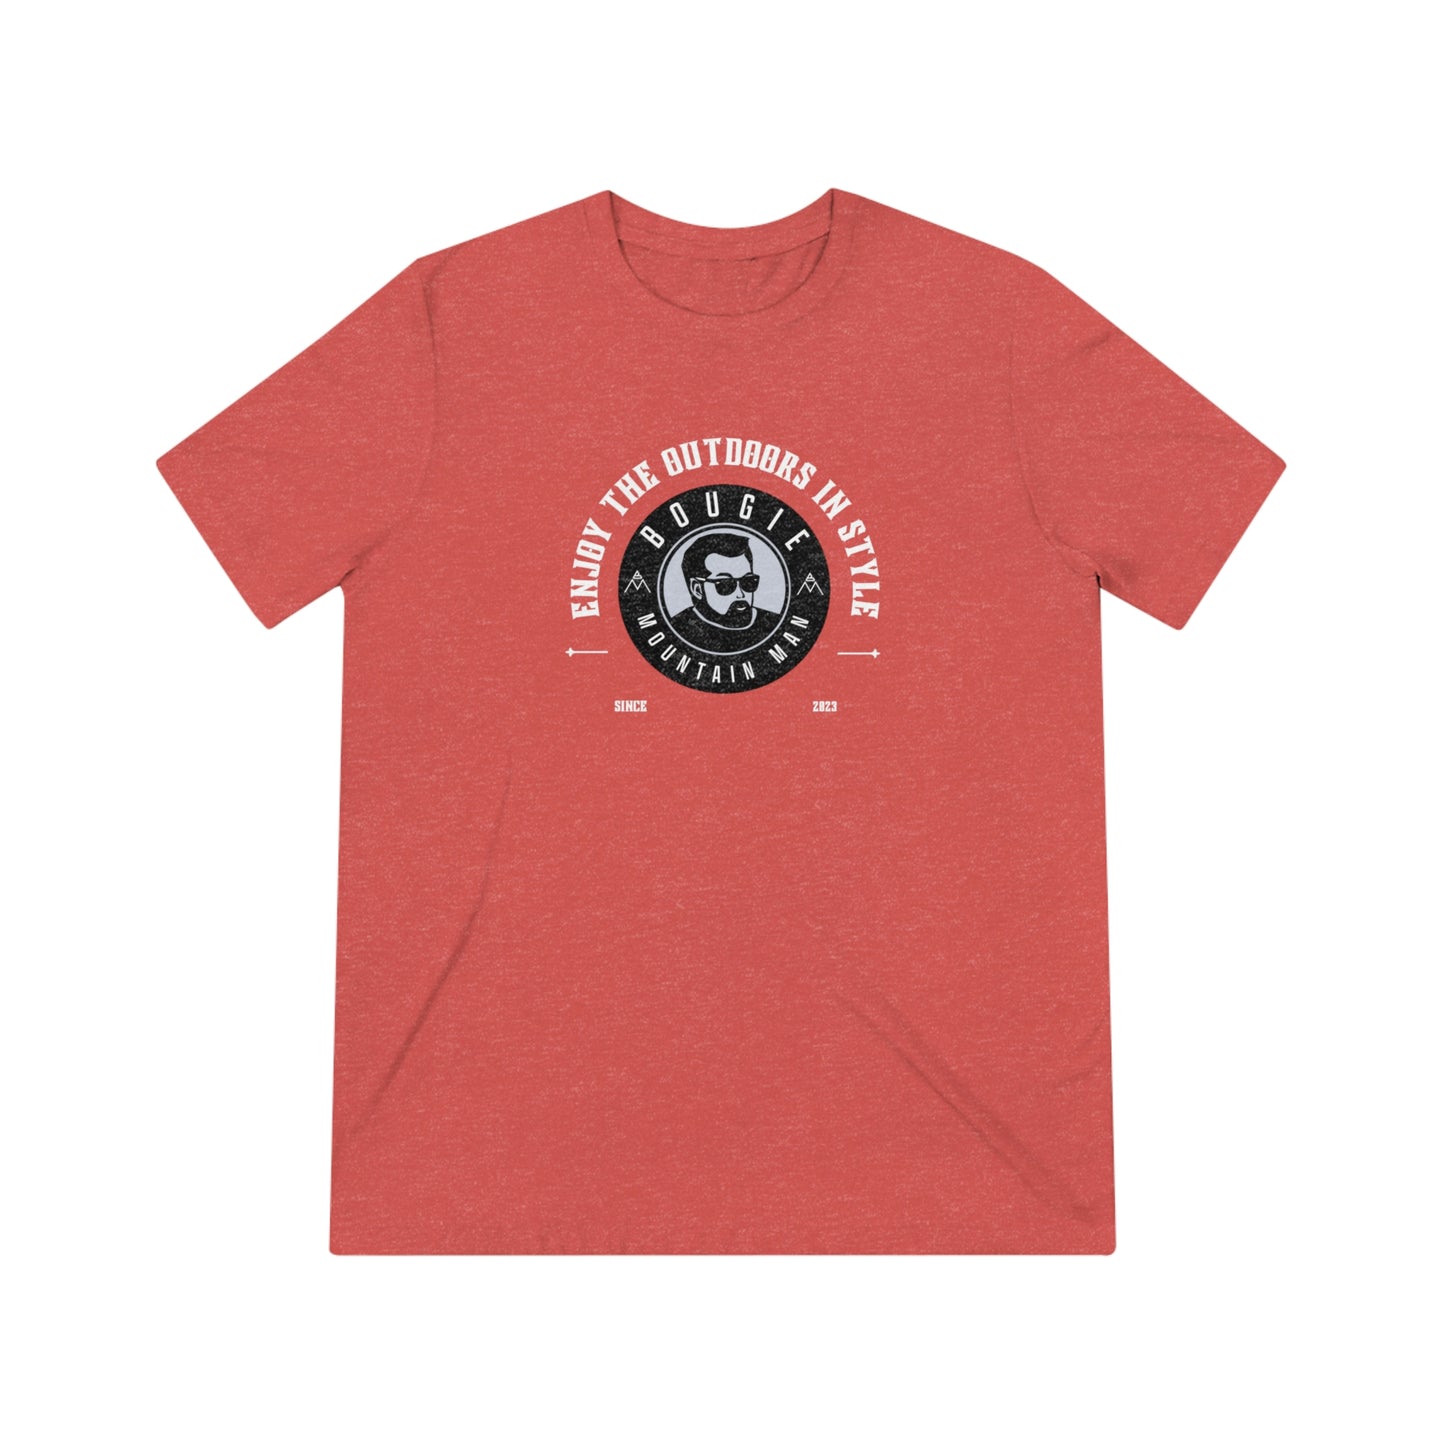 Enjoy The Outdoors In Style Triblend Tee